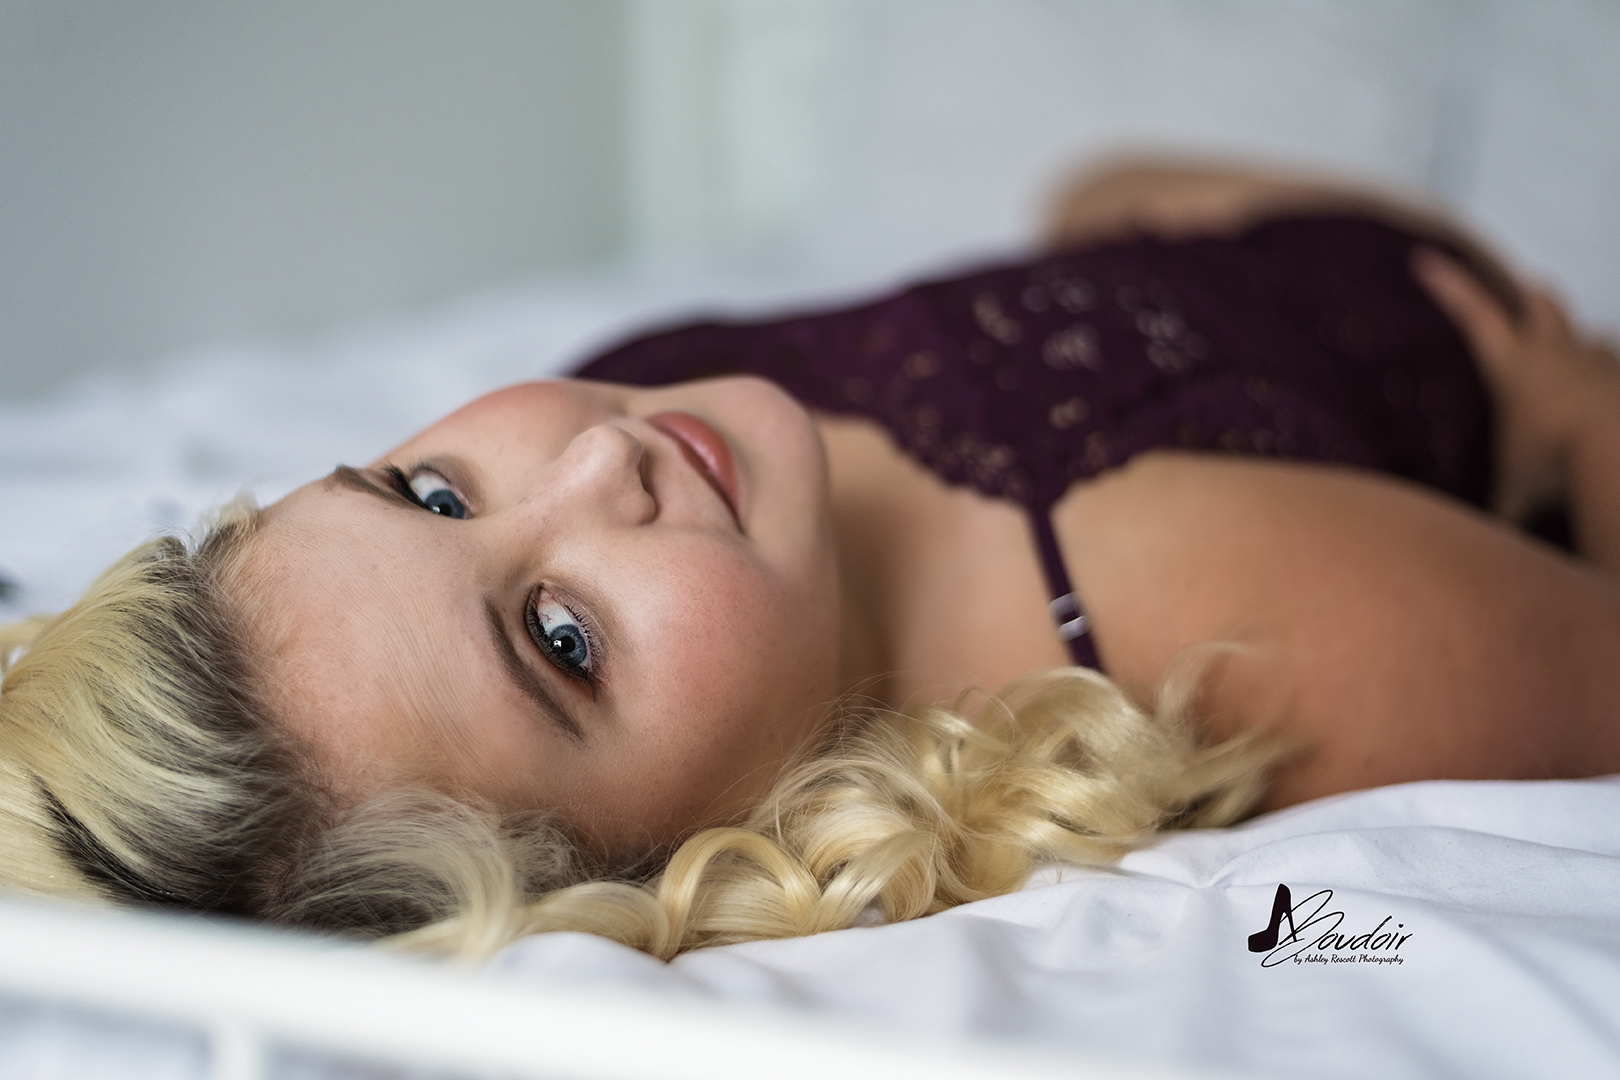 blonde bombshell on bed